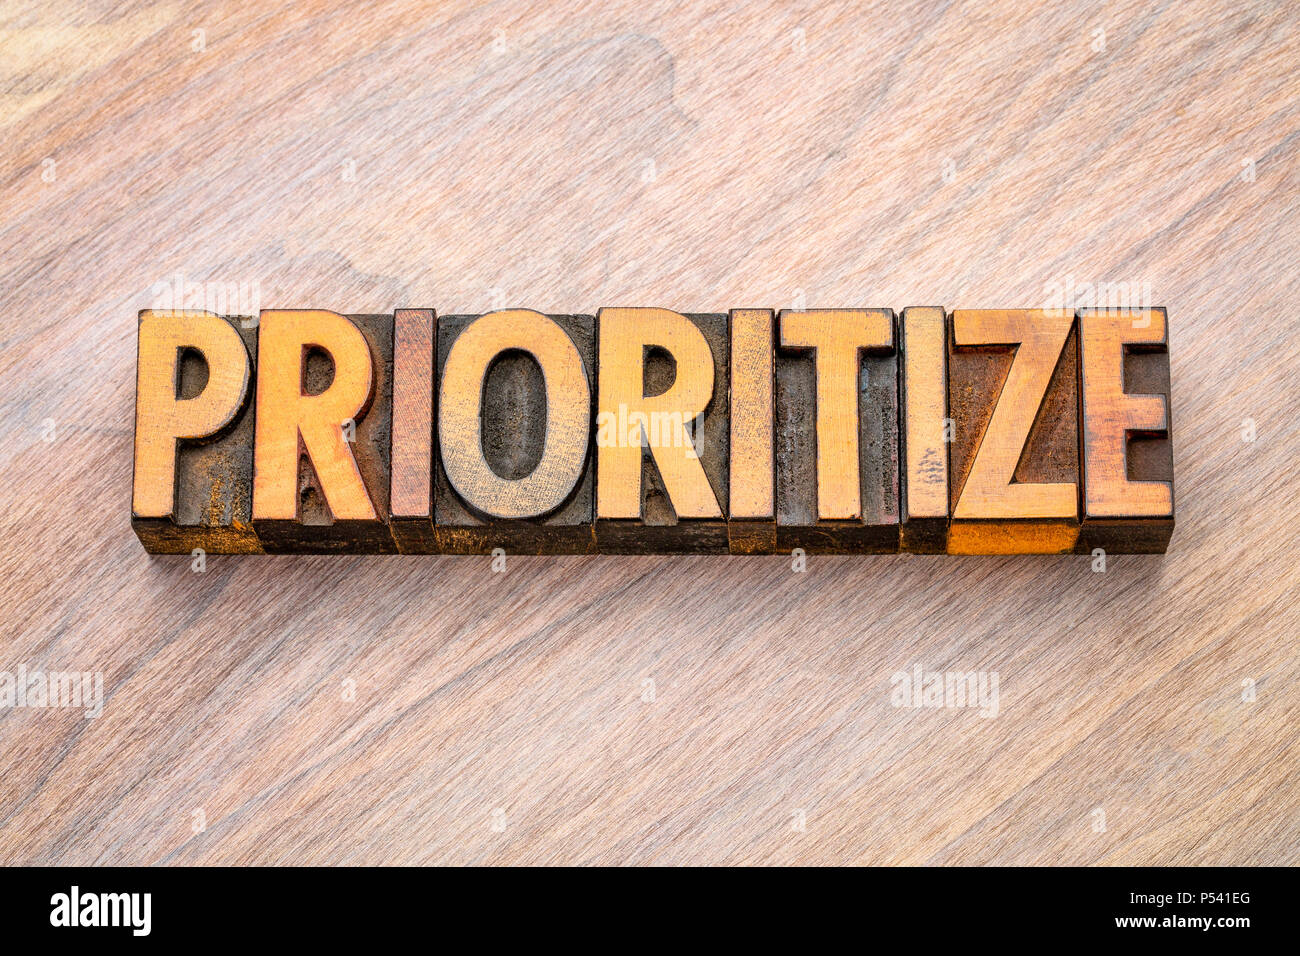 prioritize - word abstract in vintage letterpress wood type printing blocks Stock Photo